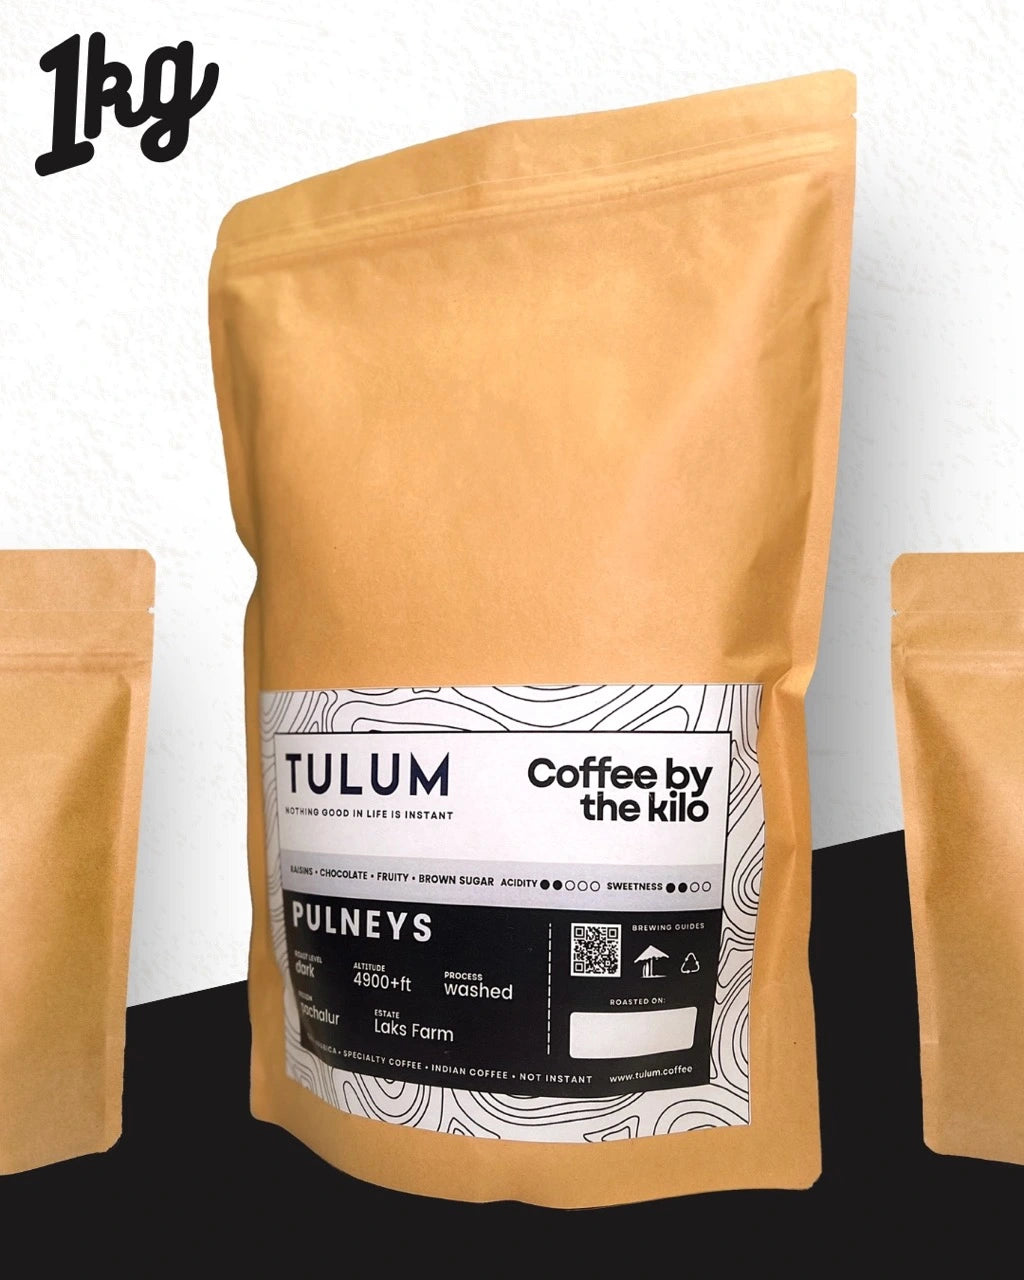 Pulneys 100% Organic And Arabica Coffee Beans By Tulum Coffee in a Brown Resealable Packets for 1 kilo with Dark and Fruity notes.